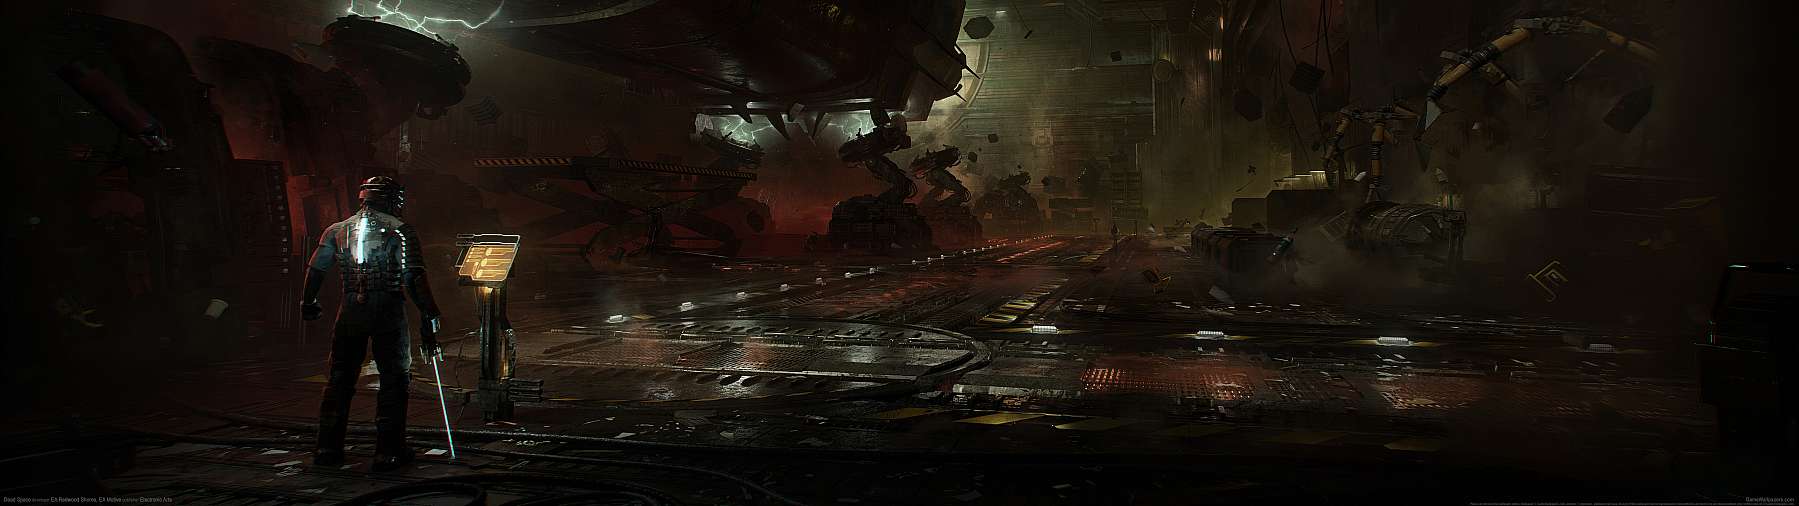 Dead Space superwide wallpaper or background 17